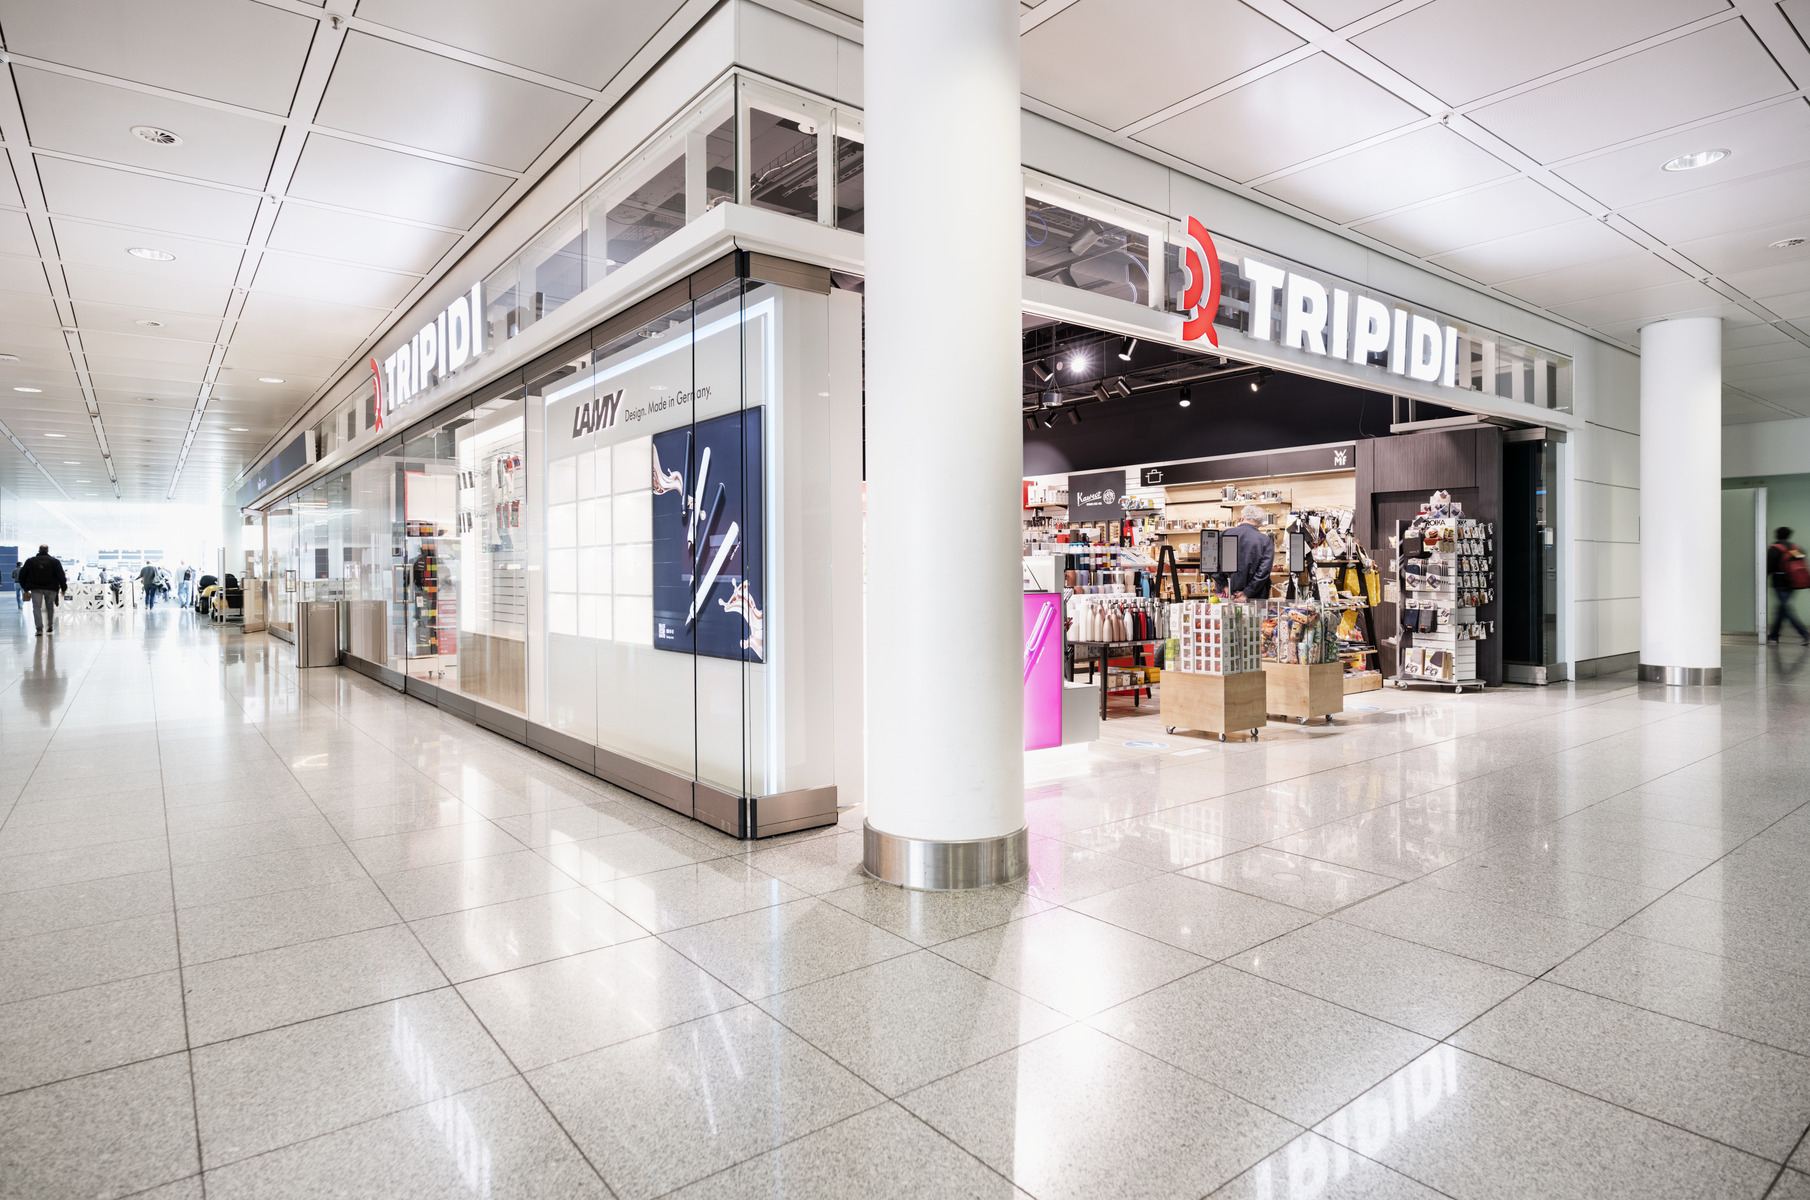 Munich Airport on Twitter: "Shopping and getting styled in our new stores  #Tripidi and #BarberHouse in Terminal 2 https://t.co/ghXLakirZM #MPresse  https://t.co/OdivmRHxAT" / Twitter